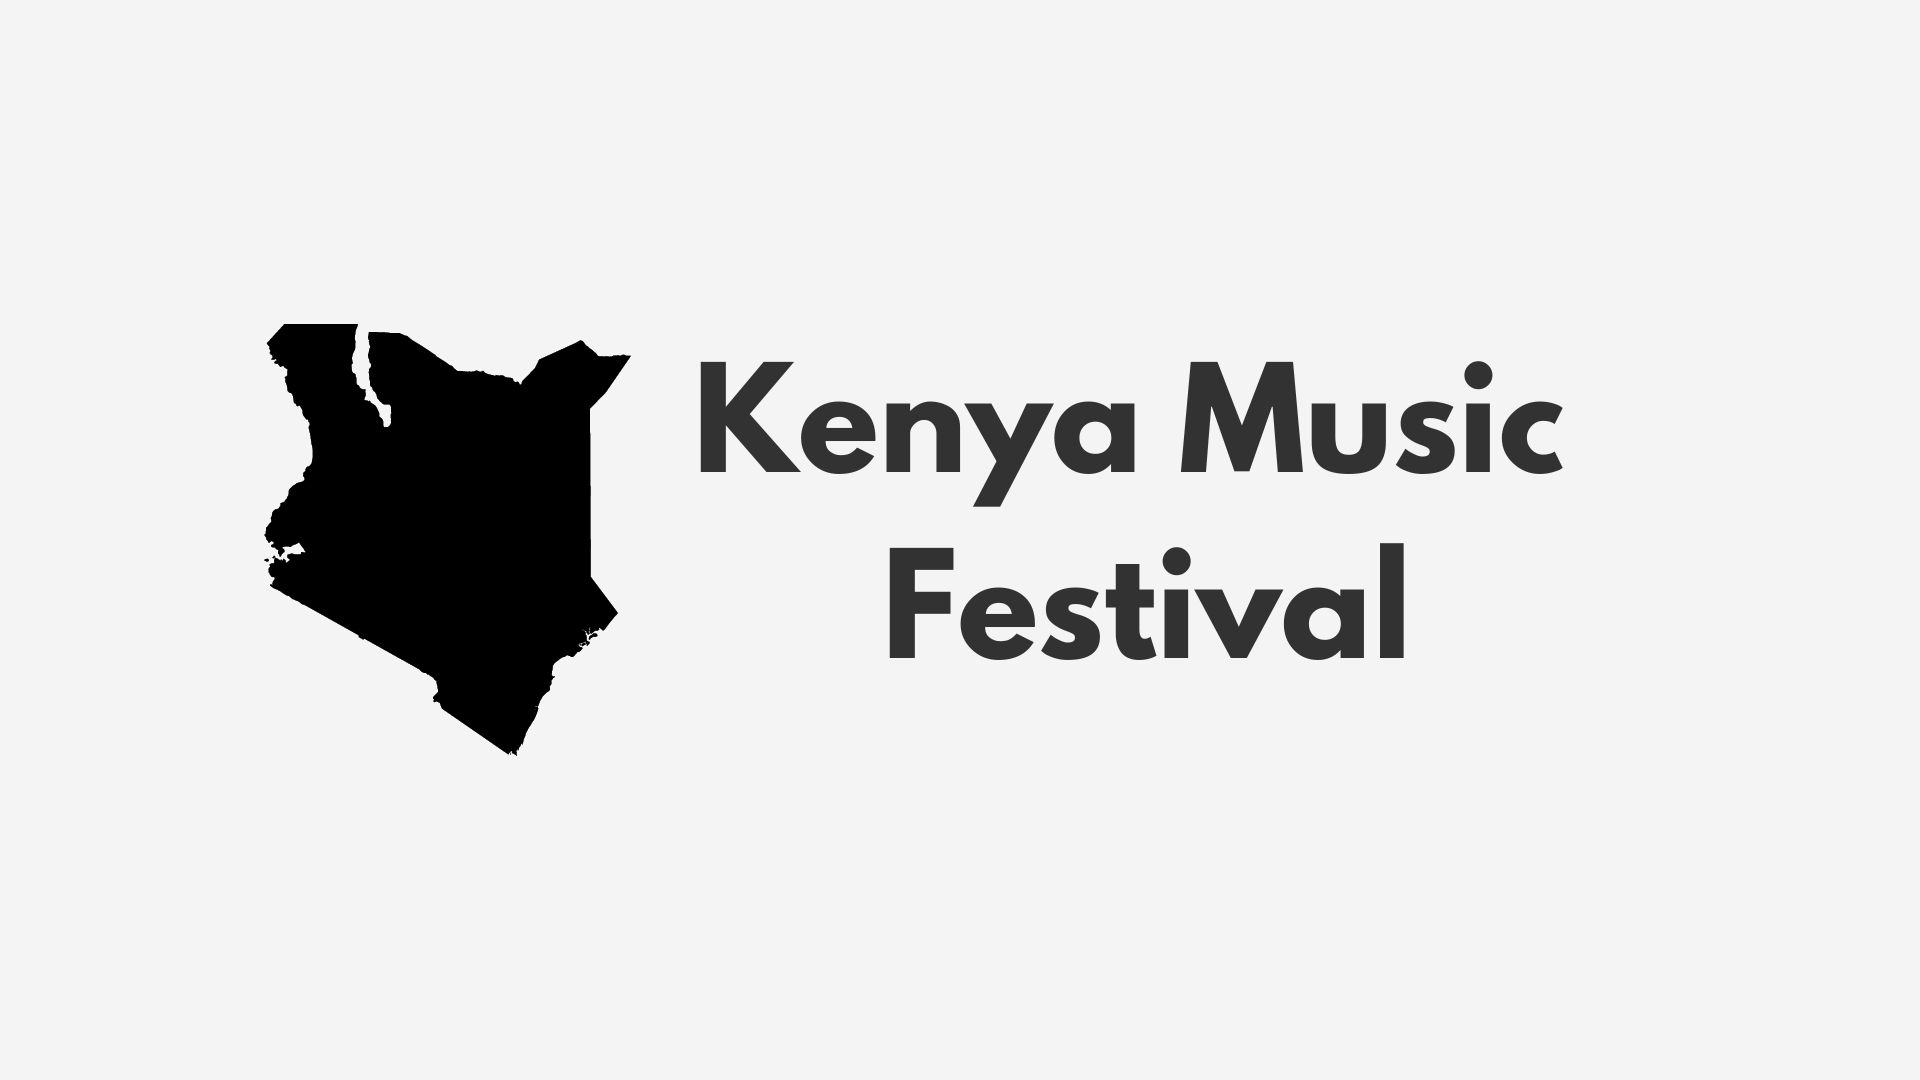 Kenya Music Festival 2023 nationals to be held in Nyeri County